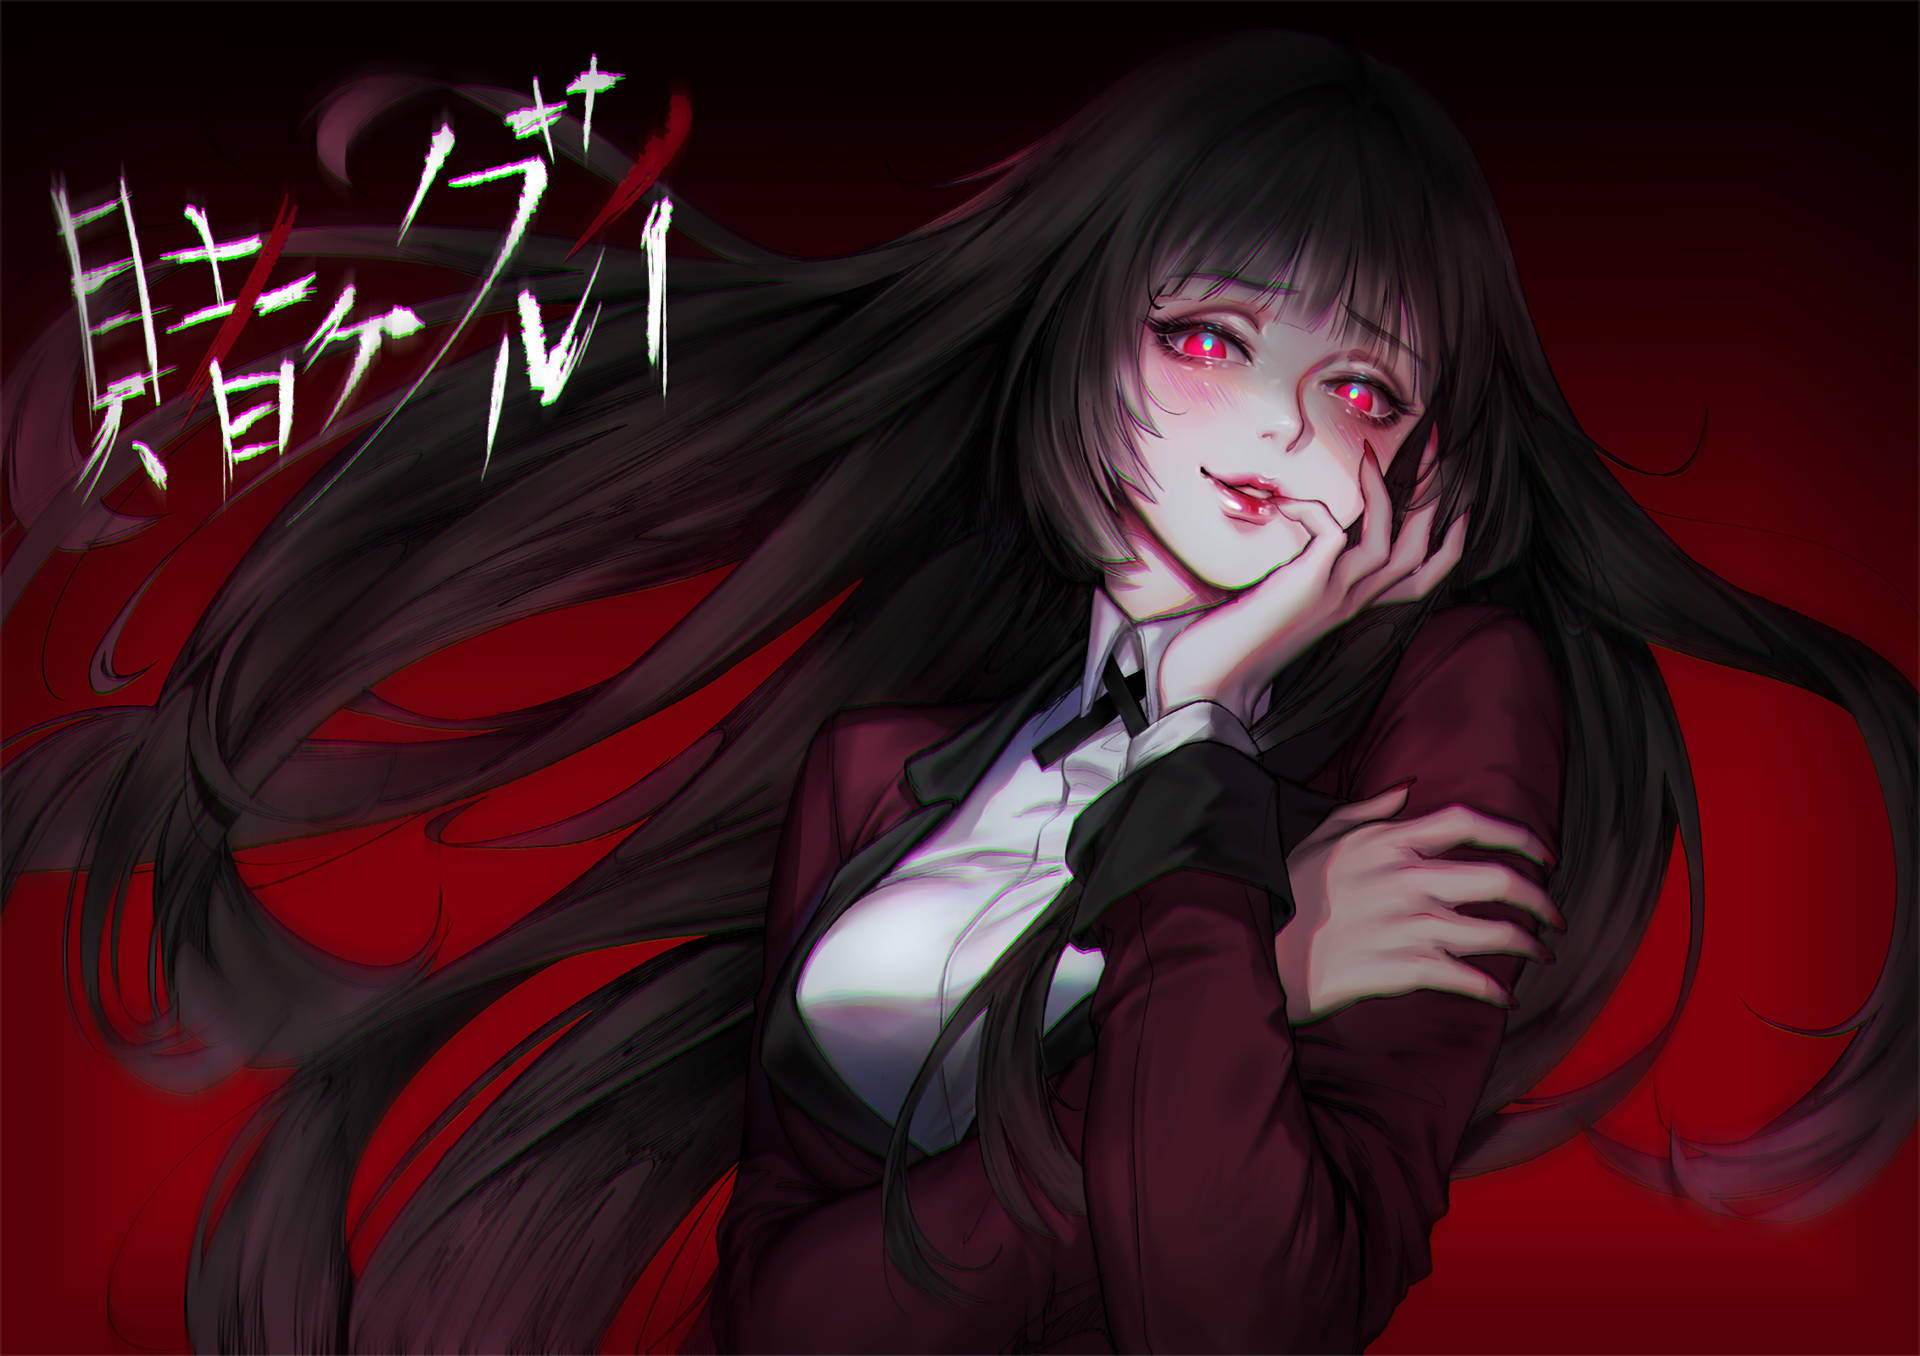 “Yumeko Jabami’s Red Eyes Show her Strong Passion and Intent” Wallpaper